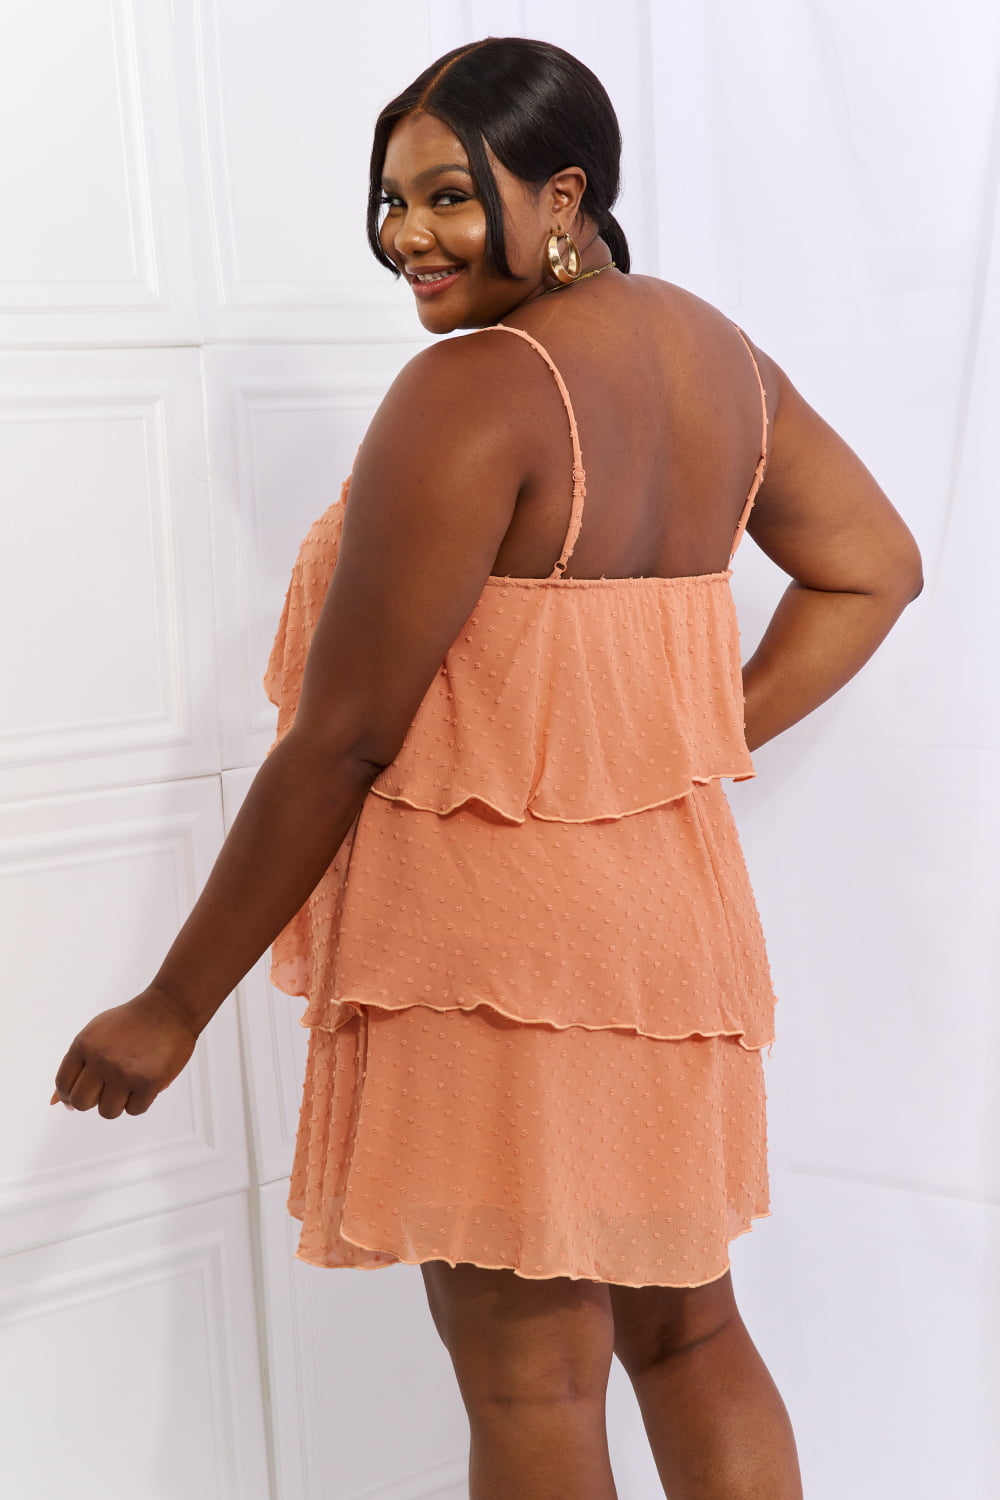 By The River Full Size Cascade Ruffle Style Cami Dress in Sherbet - All Dresses - Dresses - 8 - 2024